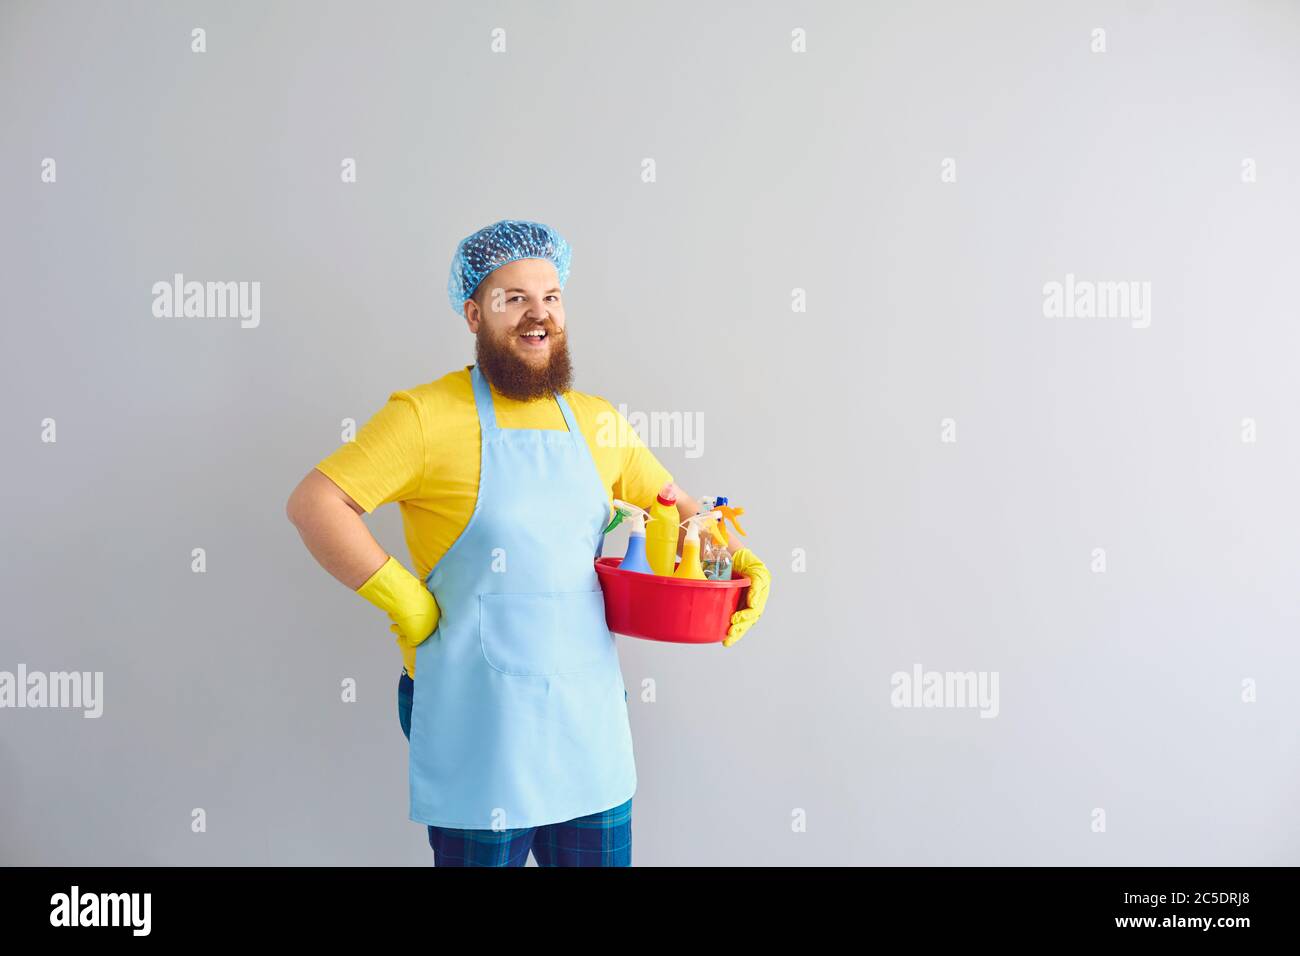 Funny fat guy with cleaning supplies on grey background, copy space. Sanitary service worker doing house chores Stock Photo